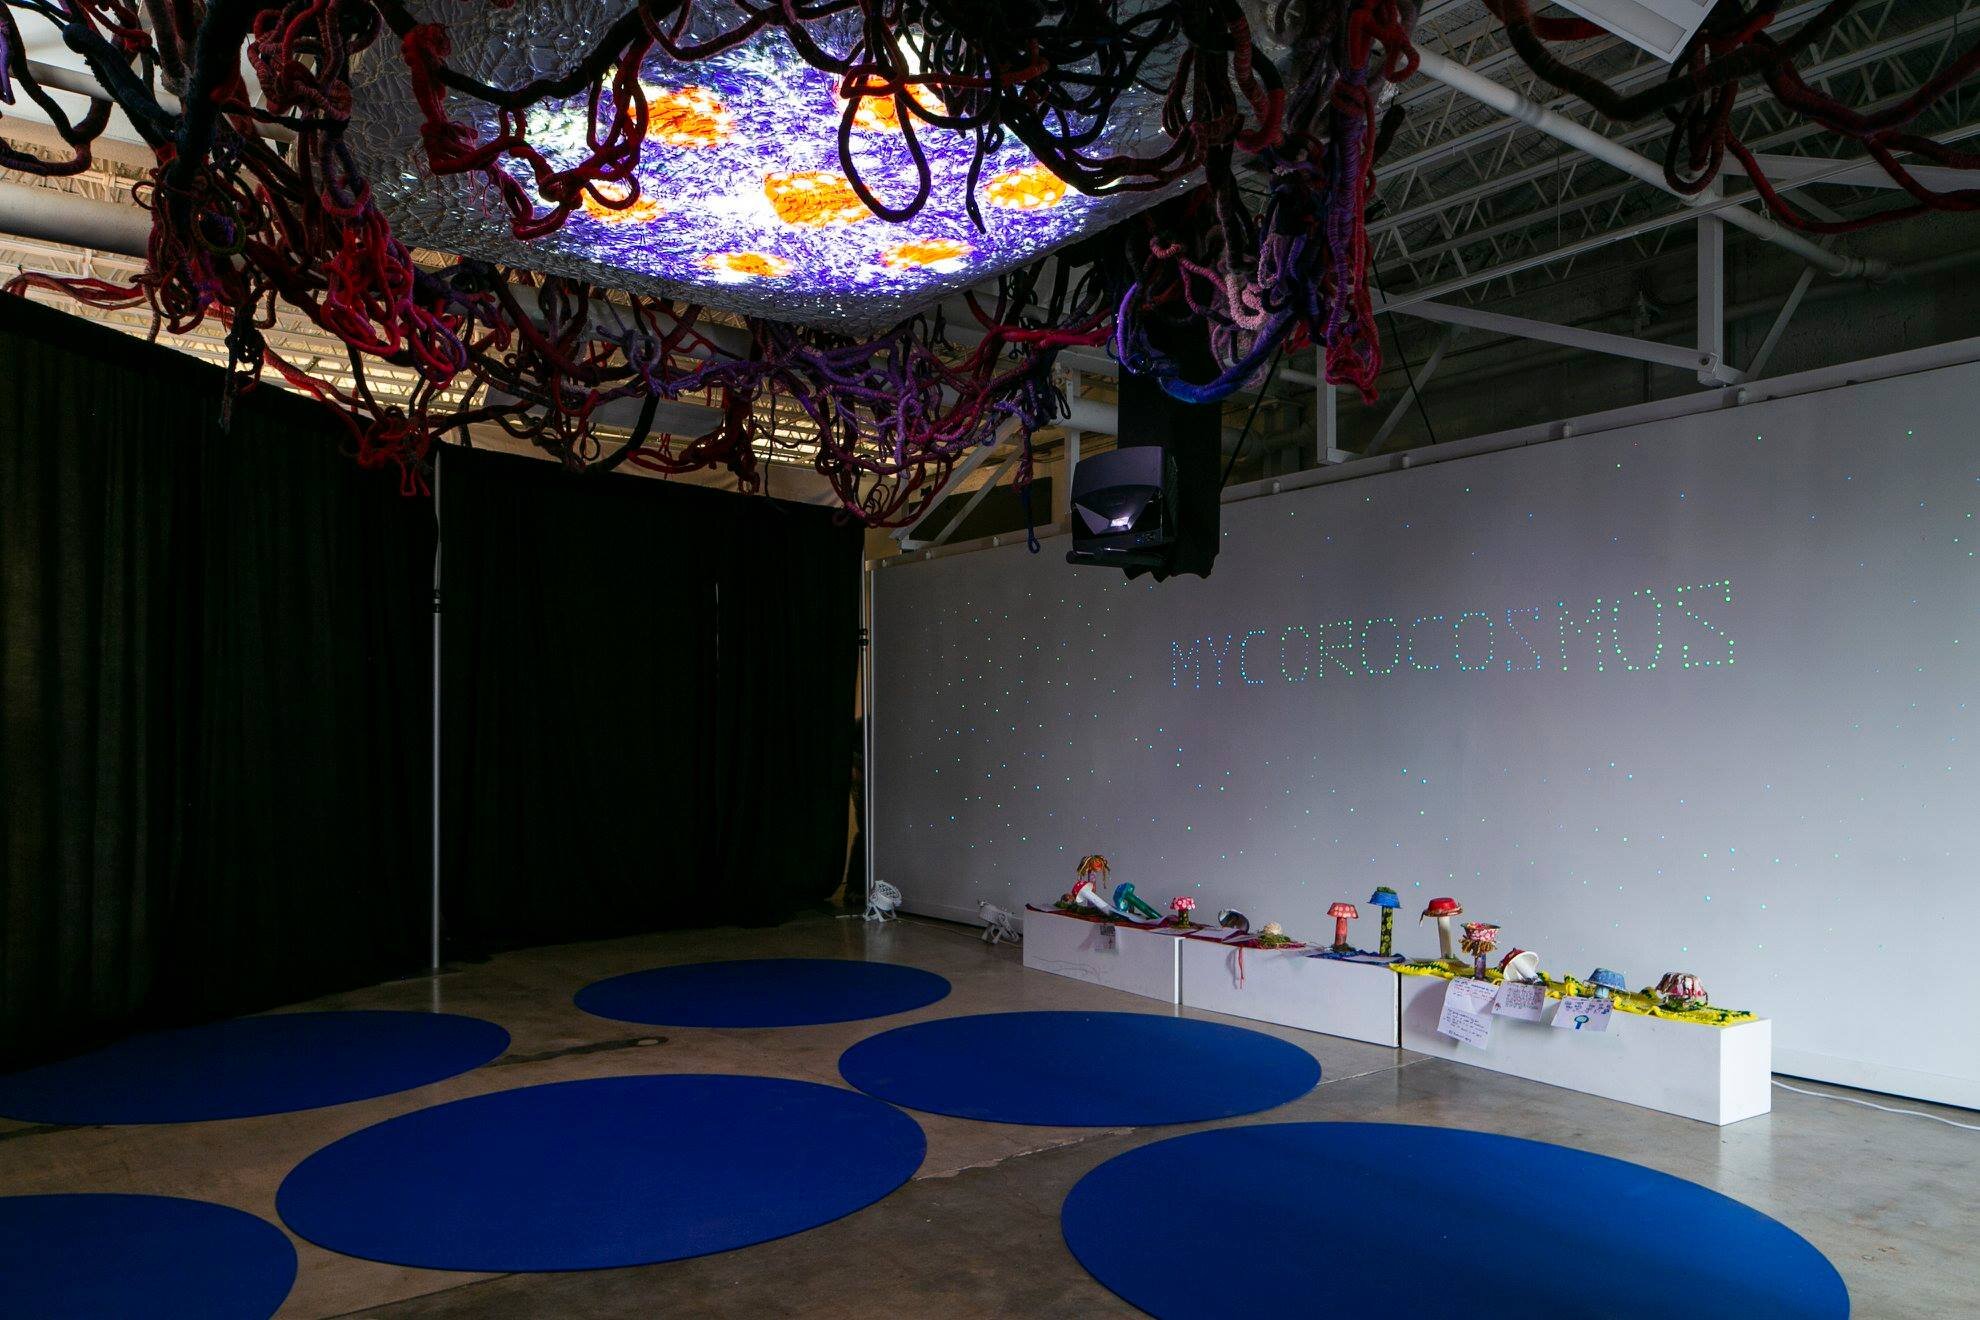  A mushroom planetarium,  MYCROCOSMOS:  Visitors will be invited to lay on the ground and look up at a ceiling screen of fiber mycelium. Netted cords and wrapped coils were created by textile artists working with a local community knitting group.   P